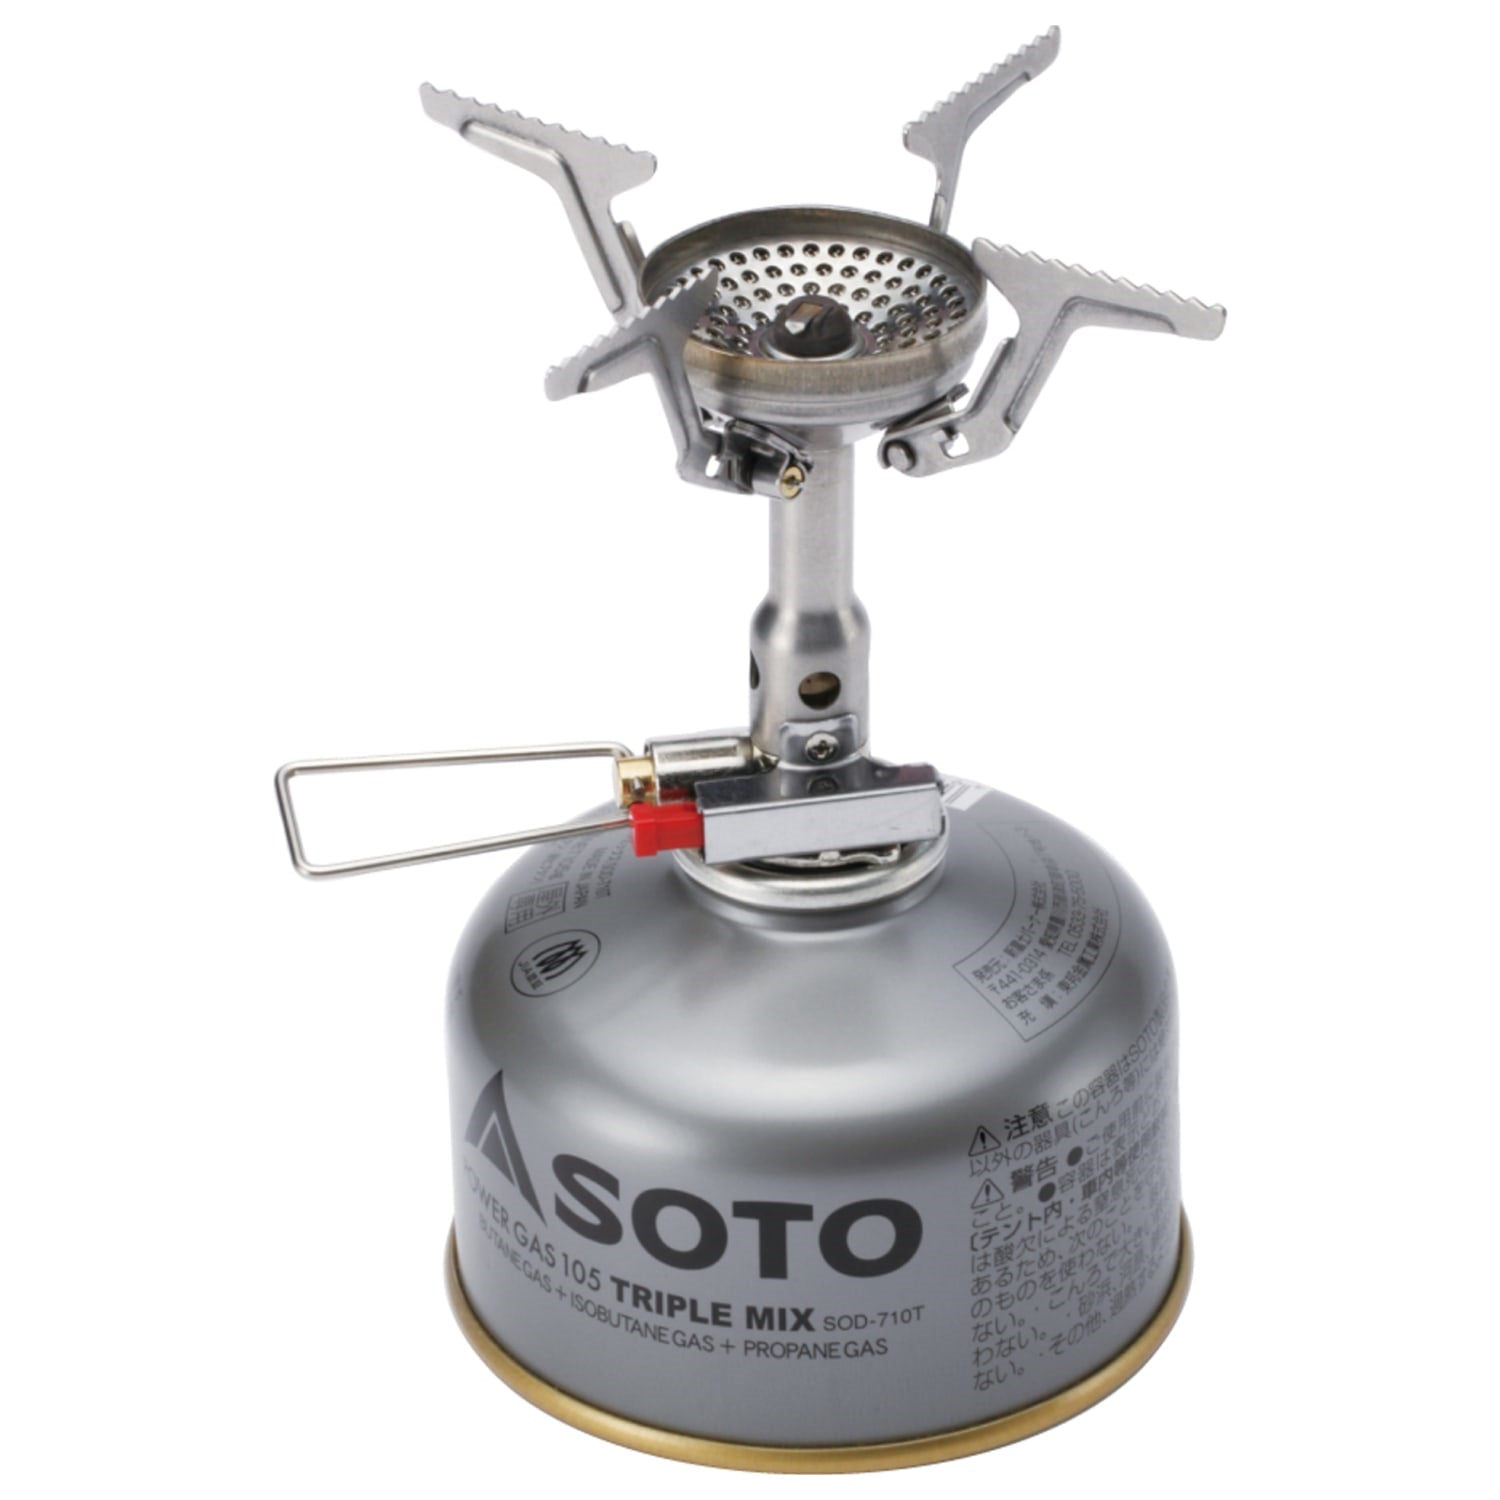 Soto Amicus Stove with Ignitor, 75g